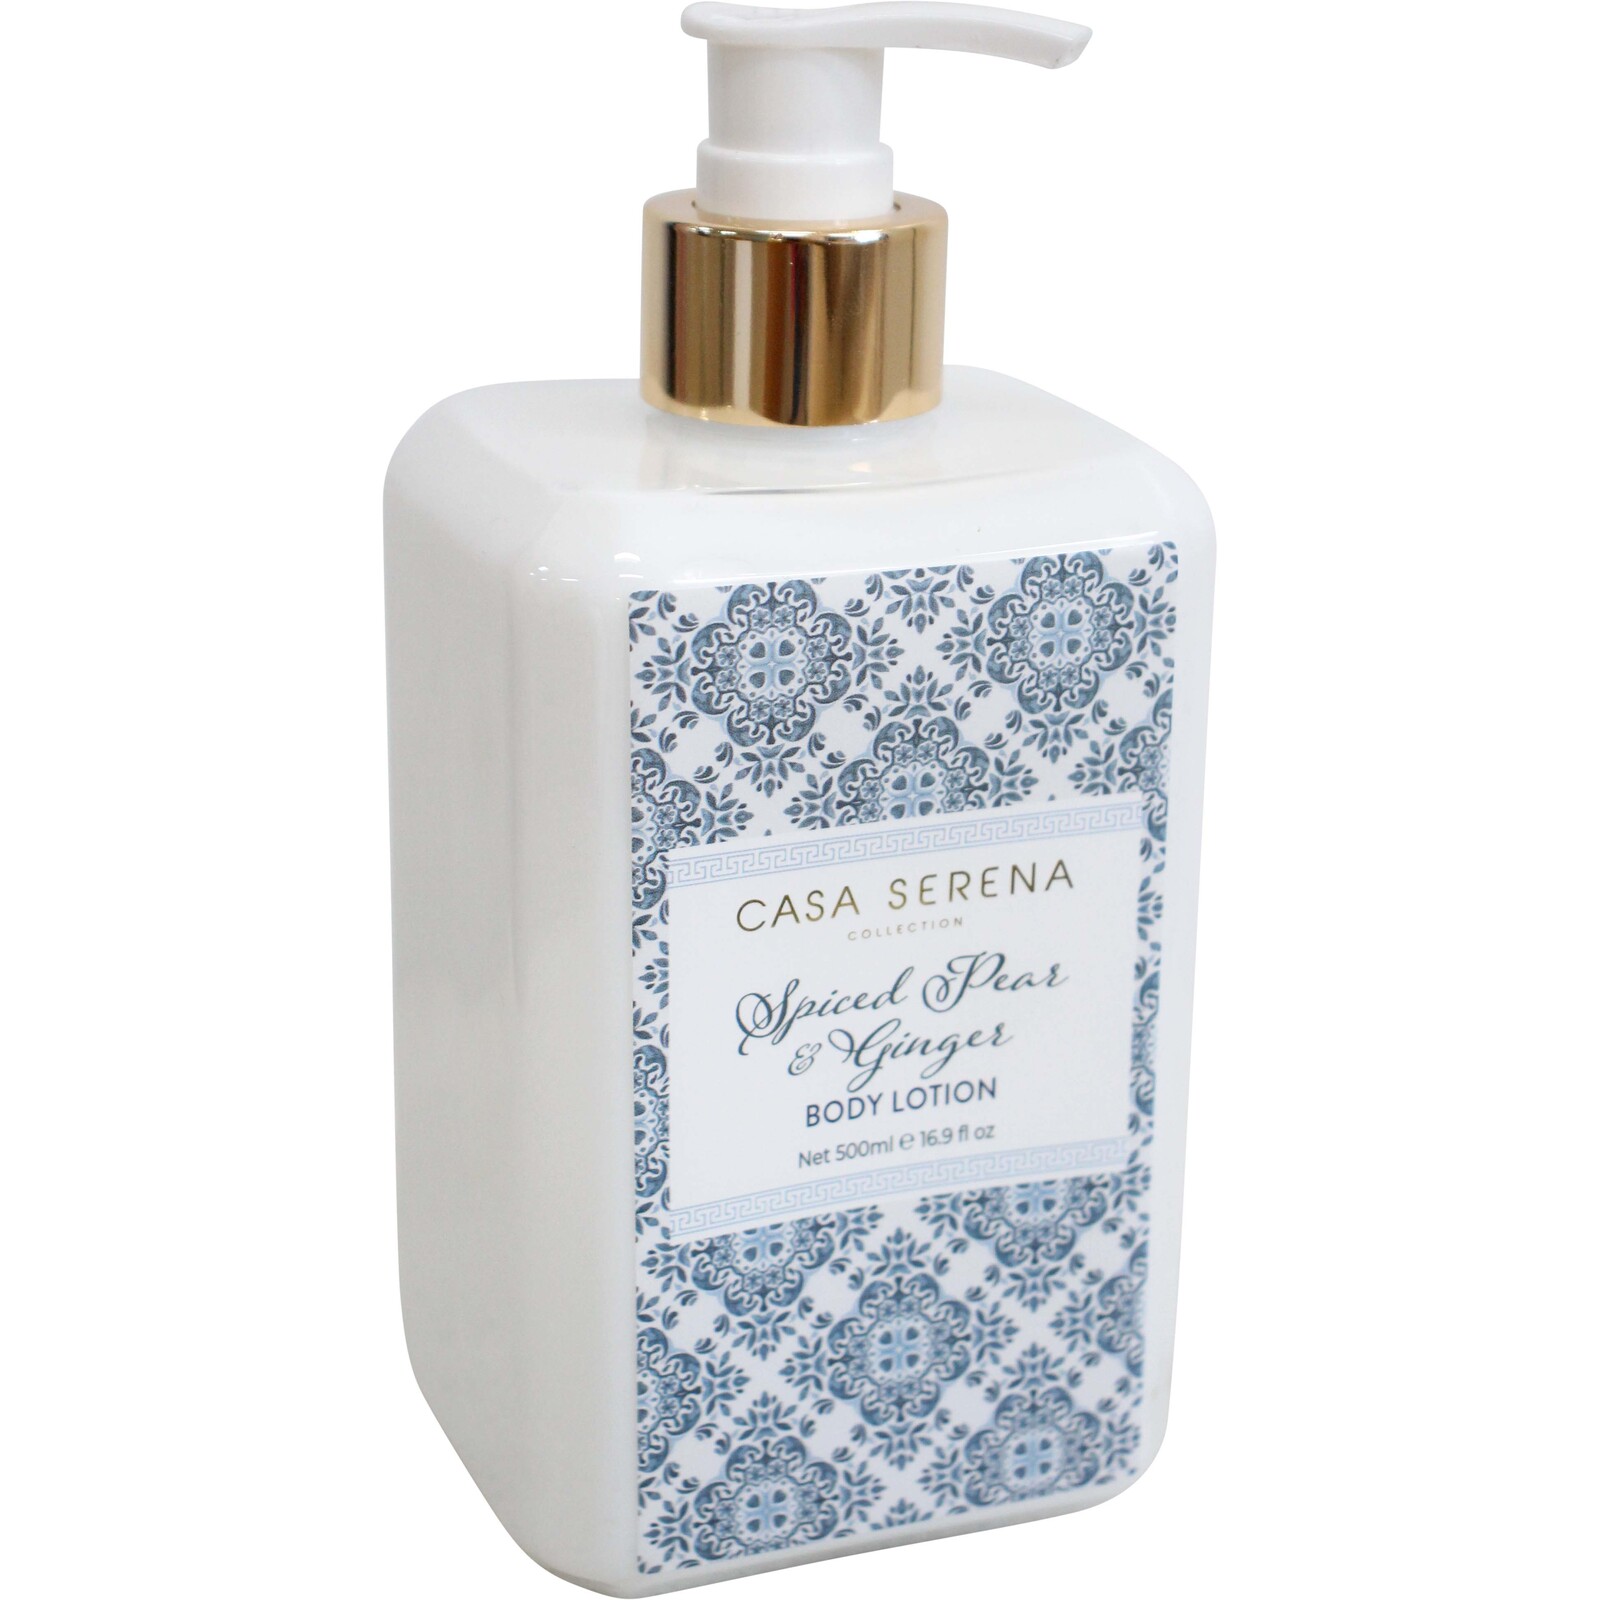 Body Lotion Spiced Pear